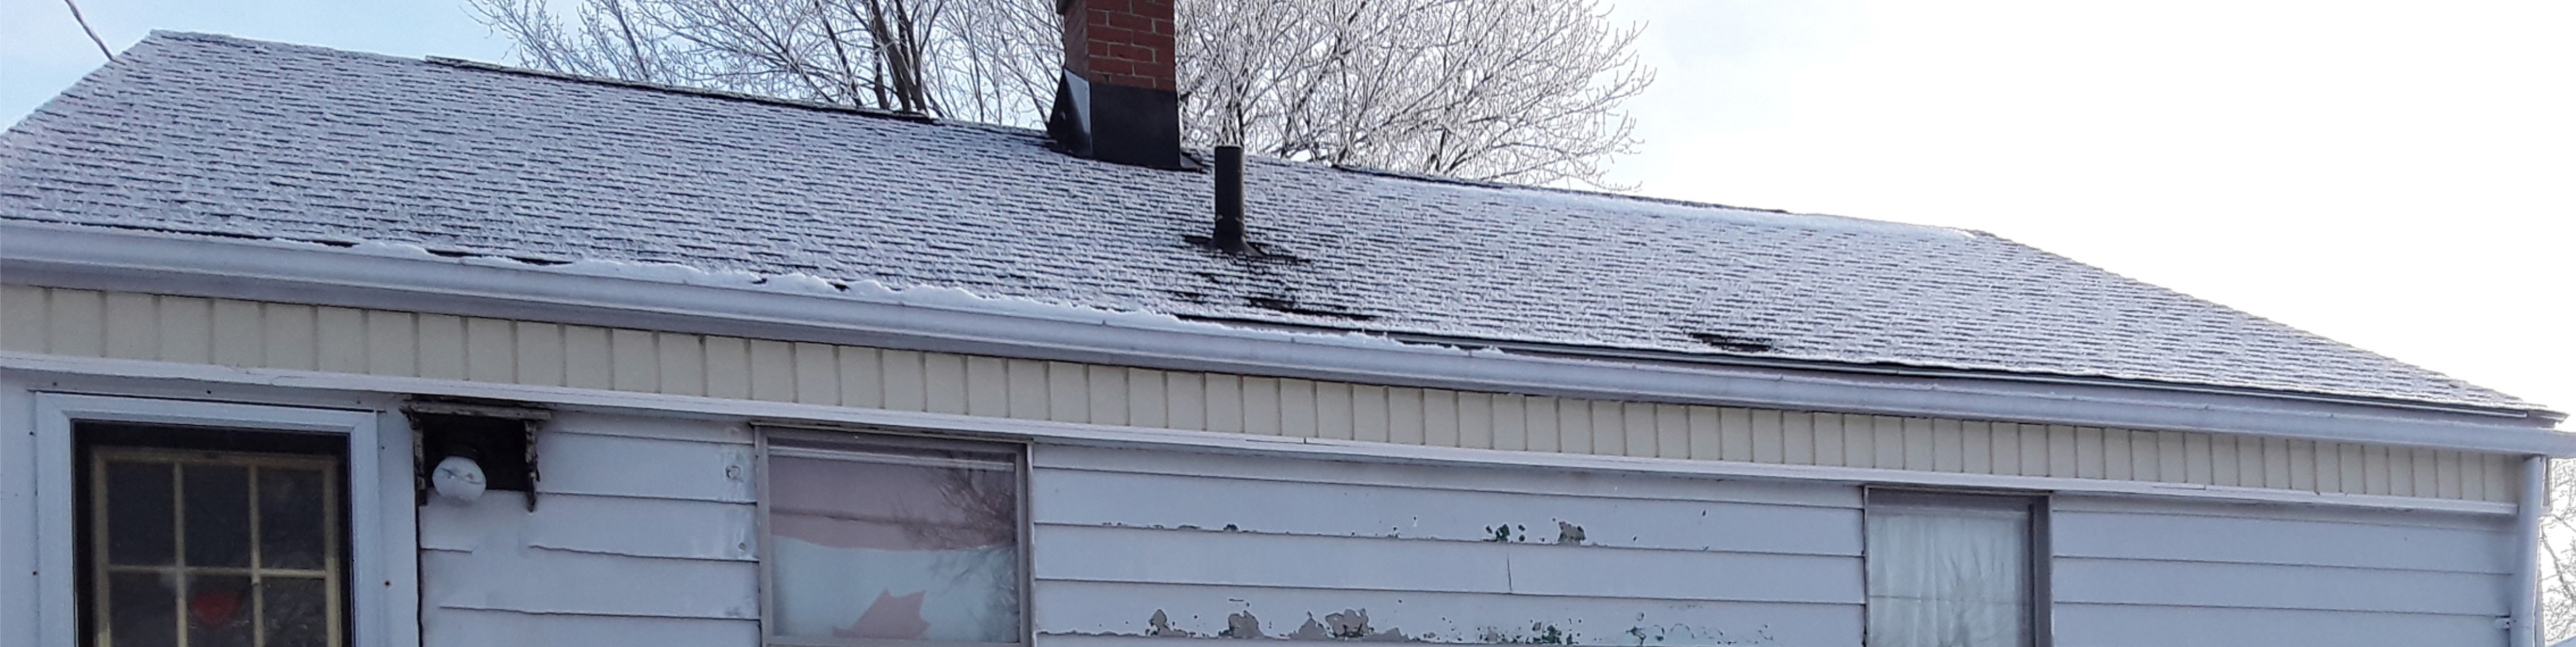 Roof of house in winter, in need of repairs.